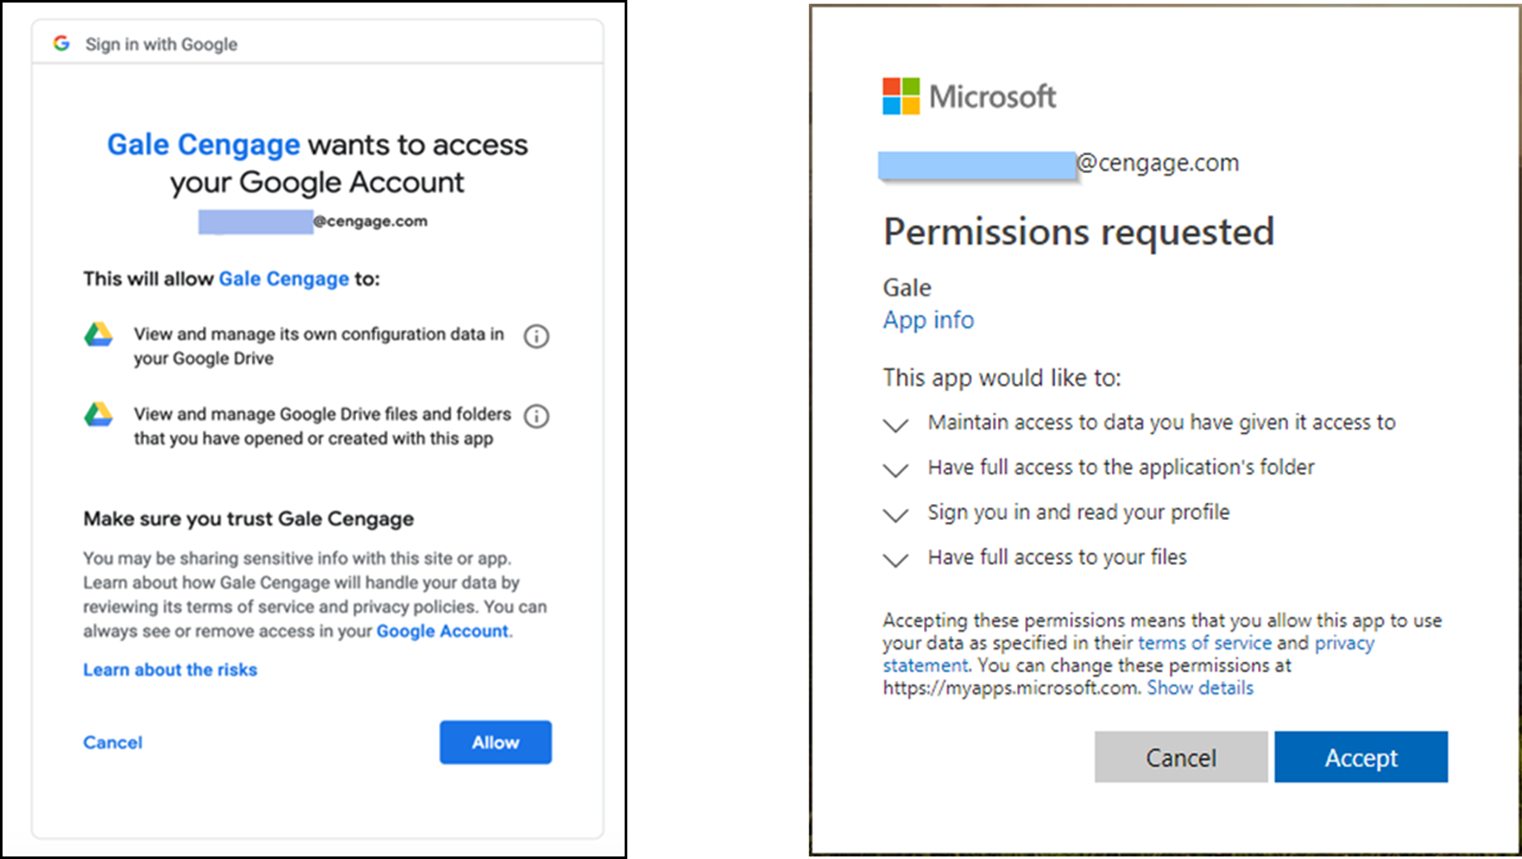 Google and Microsoft sign in prompts